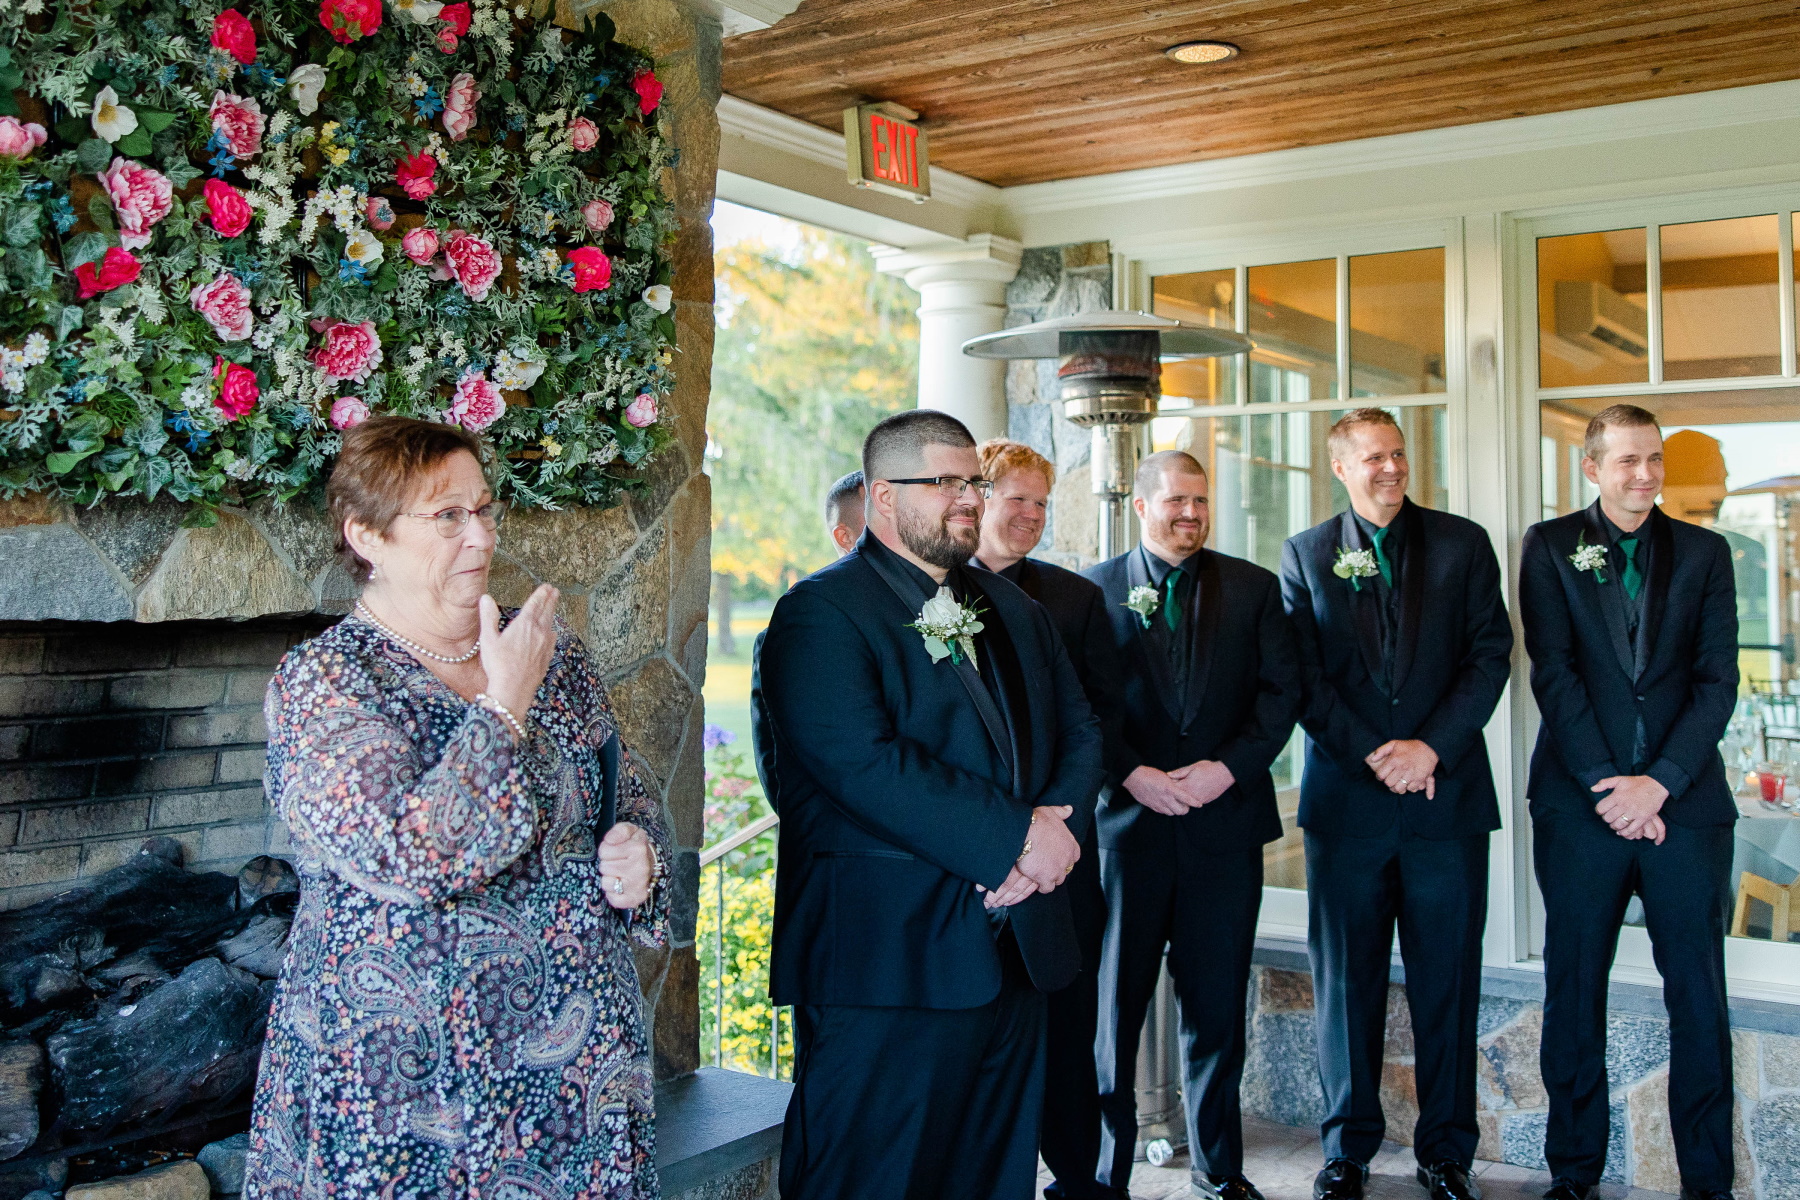 Groom and groomsmen smile as they see the bride walk down the aisle at Great Neck Country Club Wedding